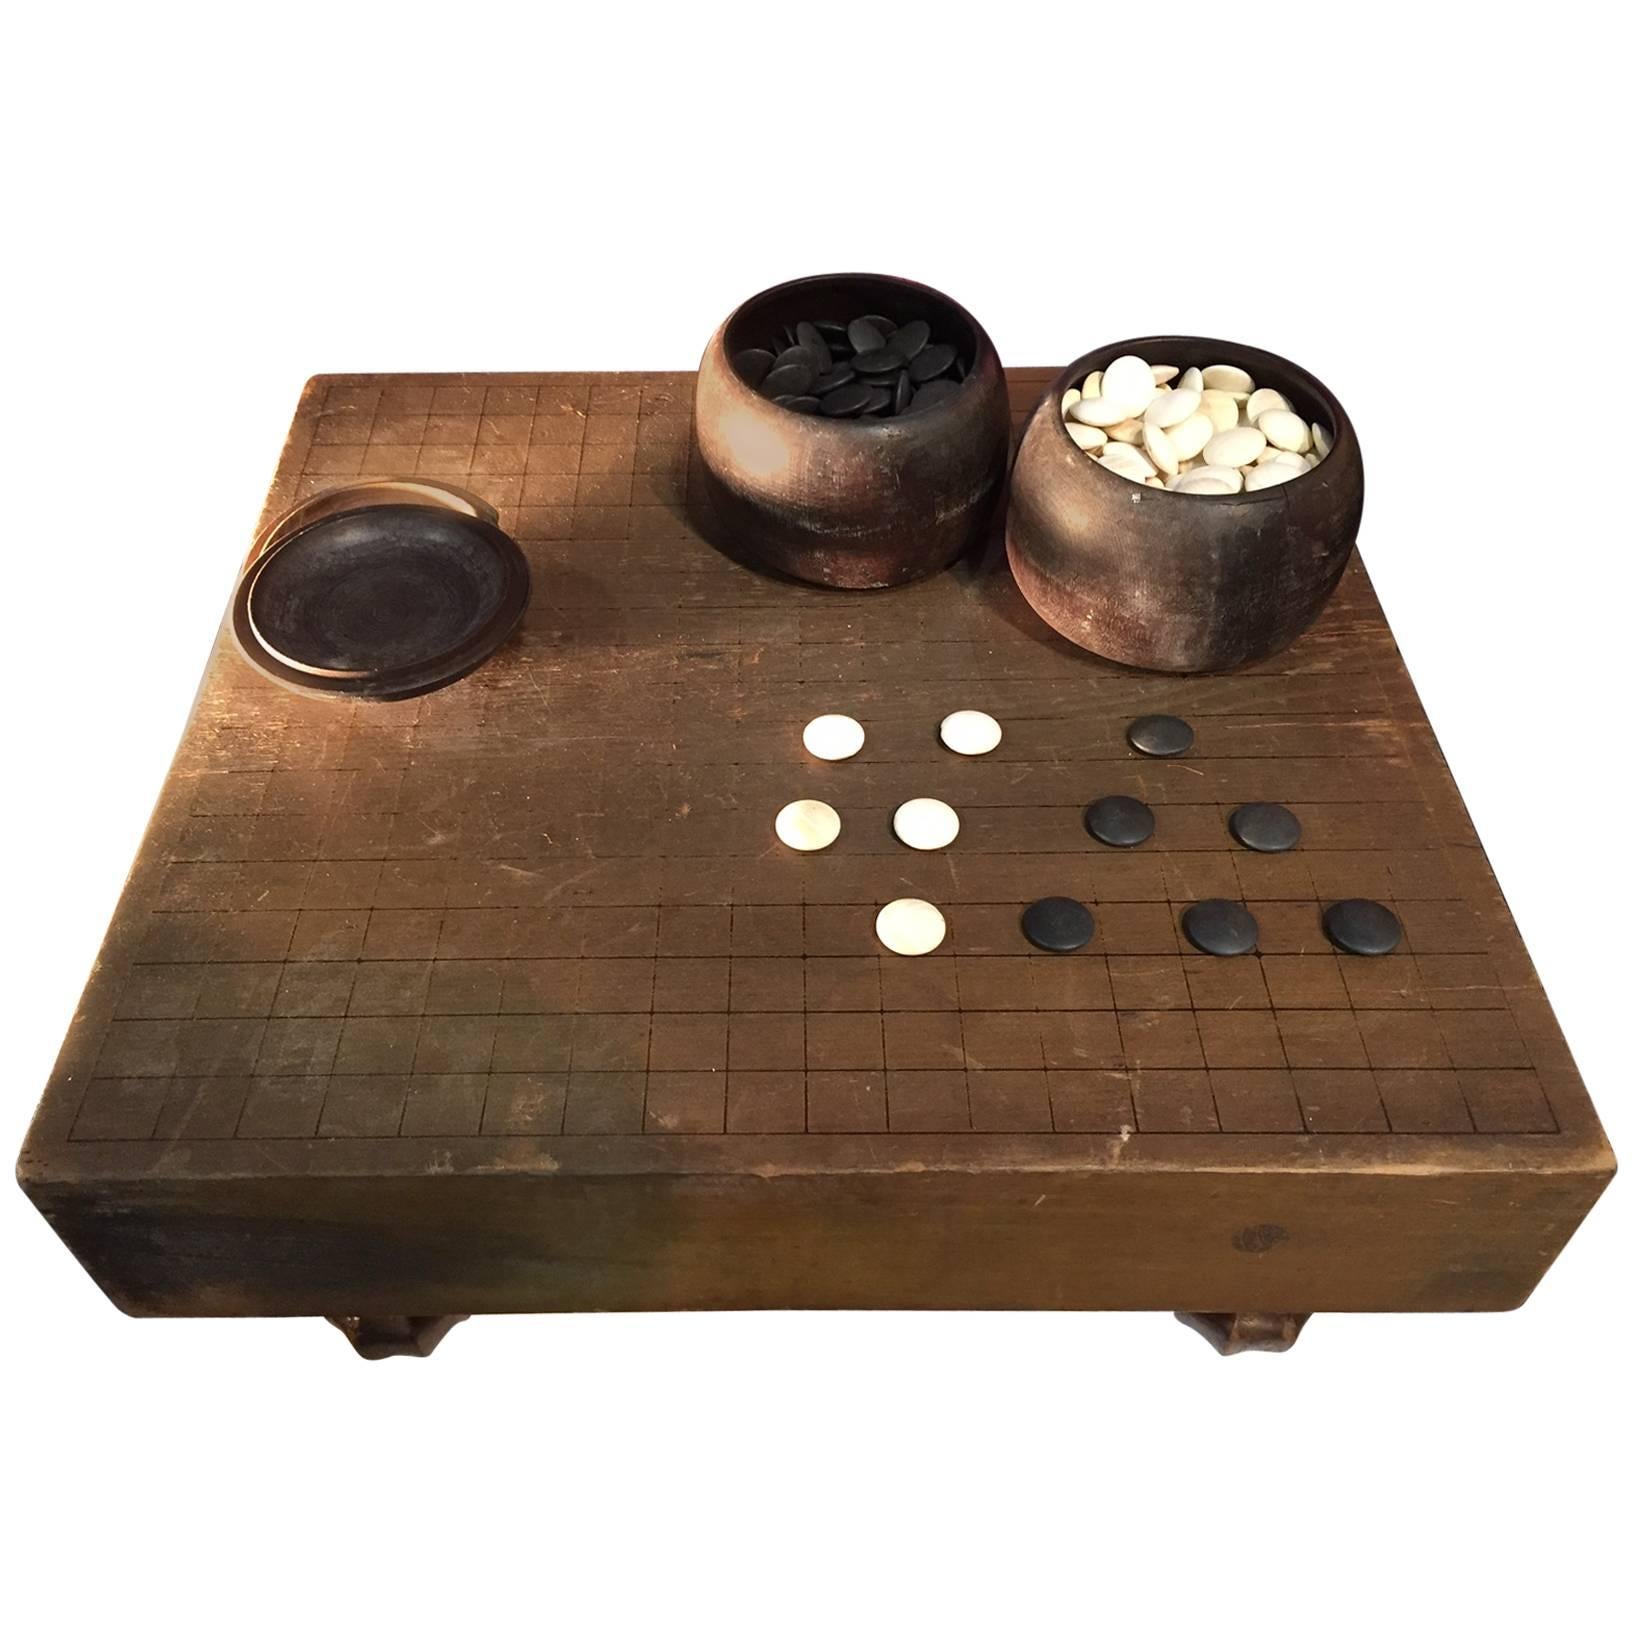 Go Game Complete Japanese Antique Goban "Go" Board Set from 1930s